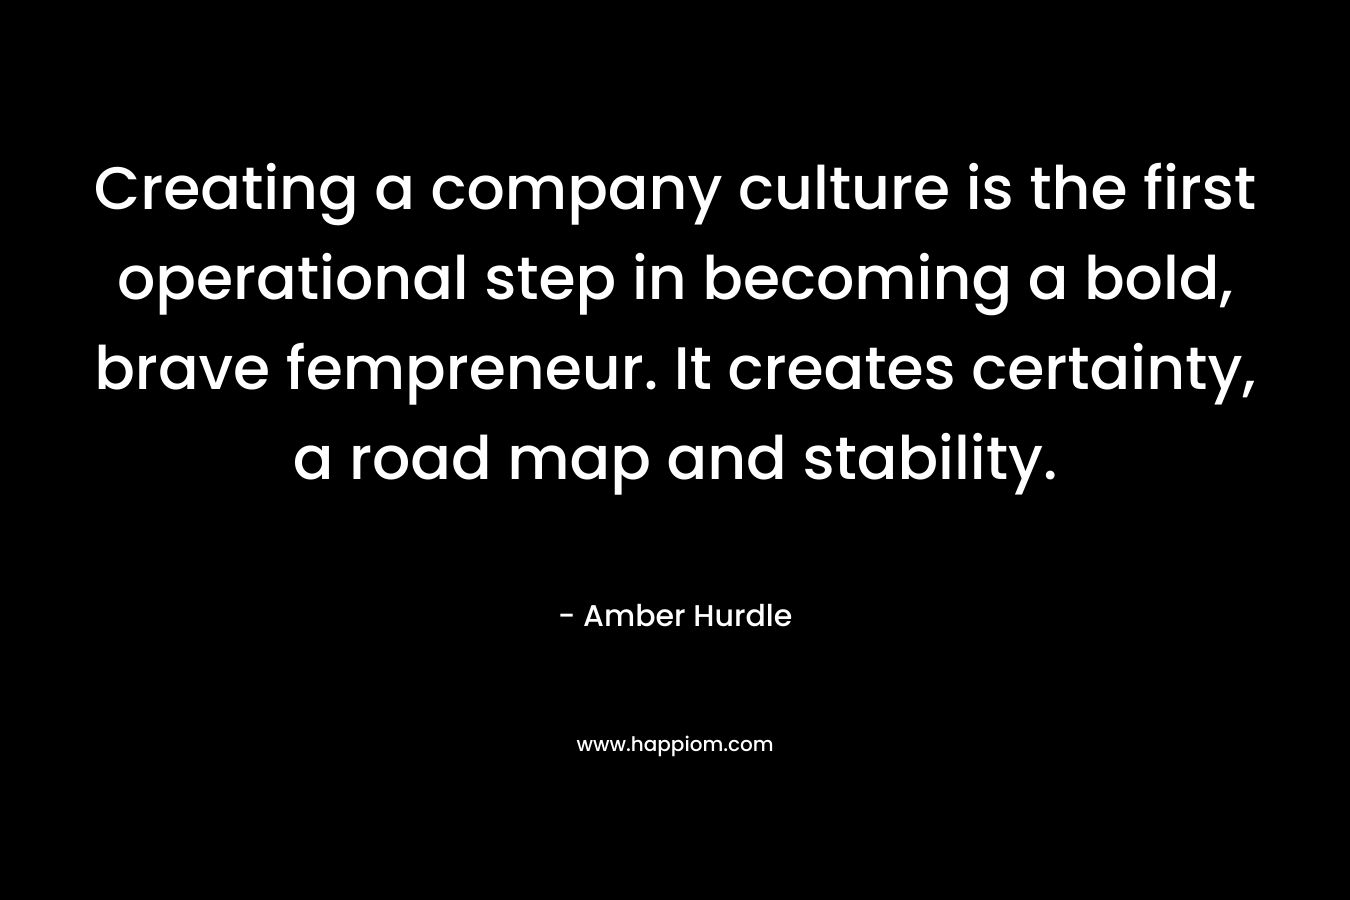 Creating a company culture is the first operational step in becoming a bold, brave fempreneur. It creates certainty, a road map and stability. – Amber Hurdle